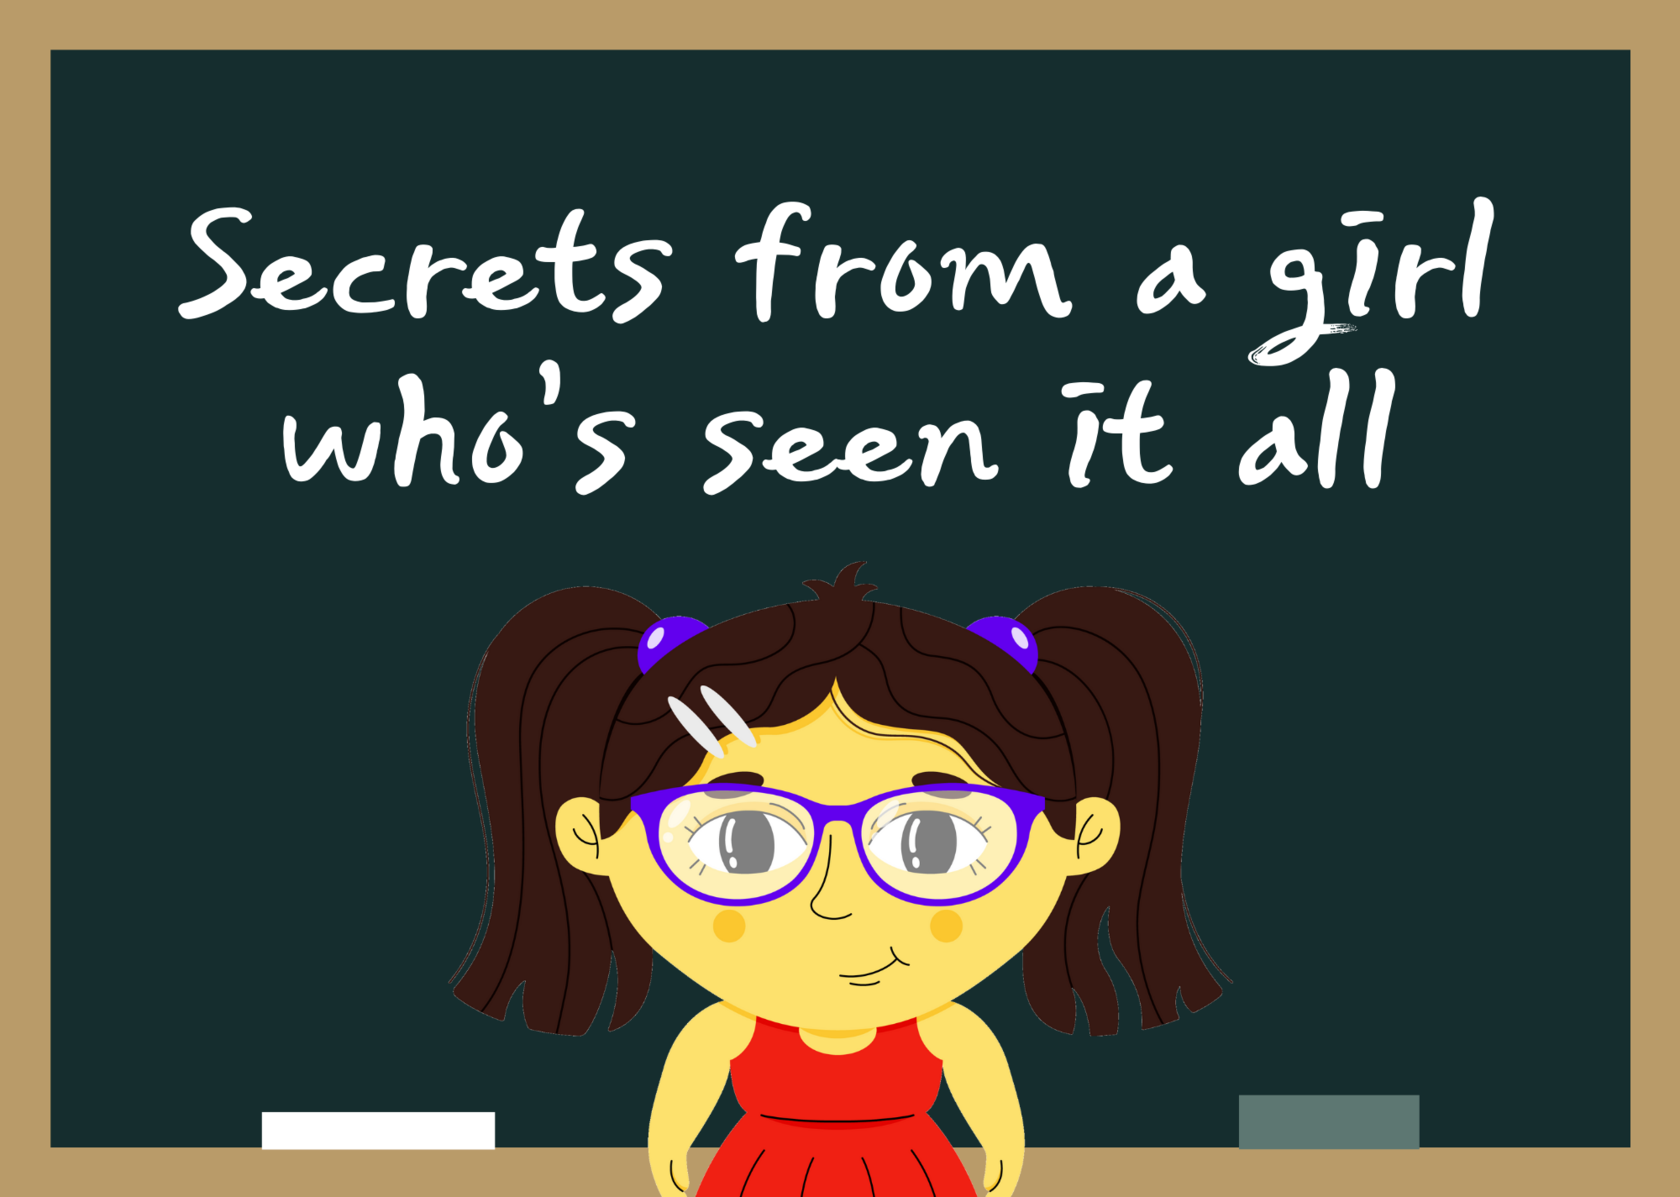 Secrets from a girl who's seen it all